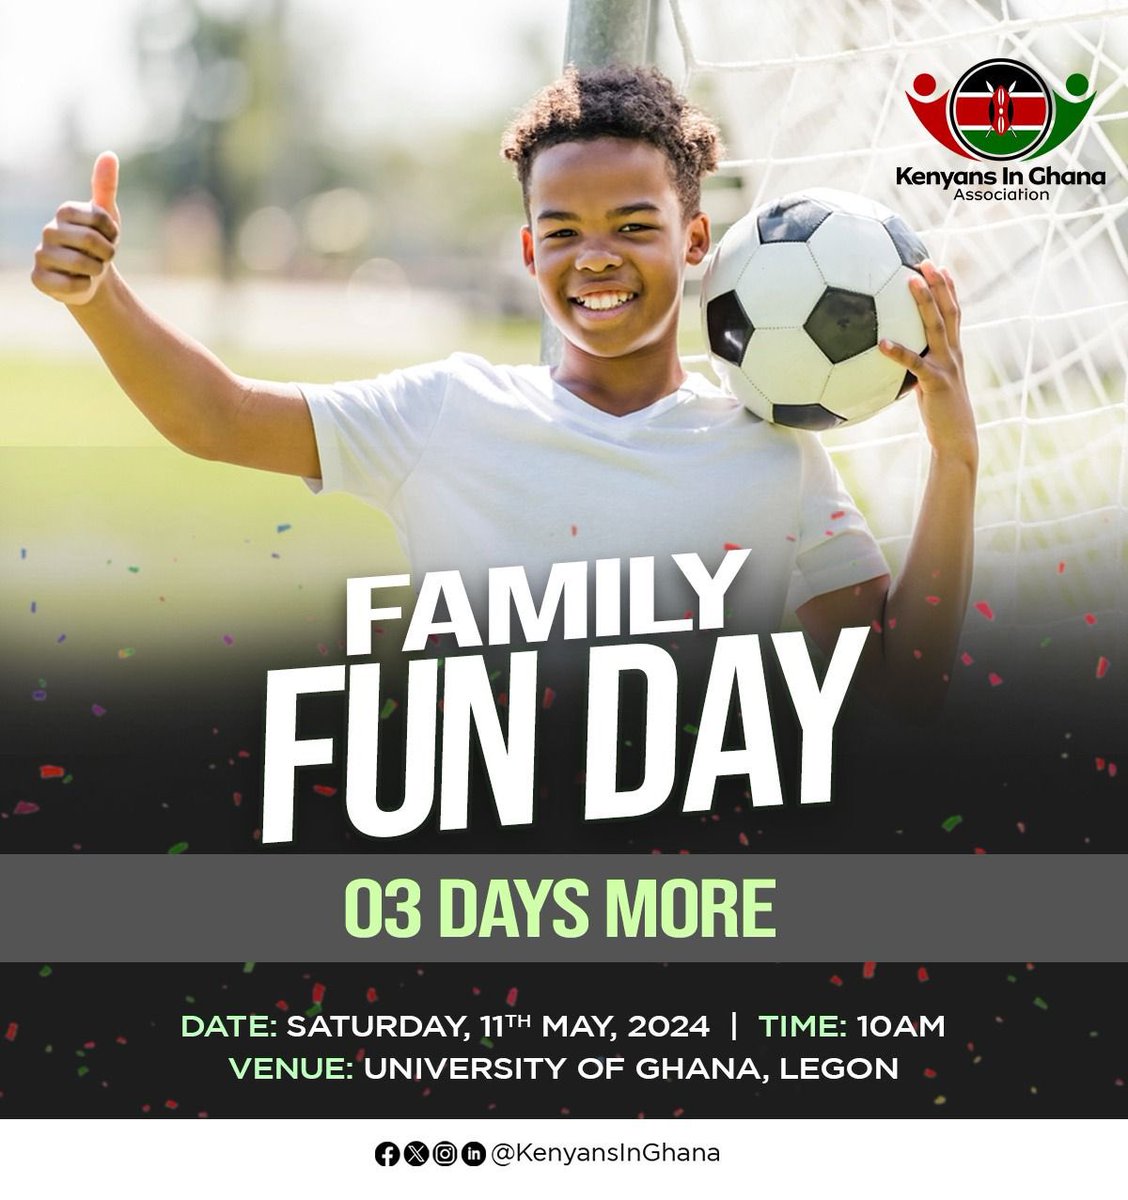 Just 3 days now to a fun filled day! 
#FamilyFunDay #KenyansInGhana